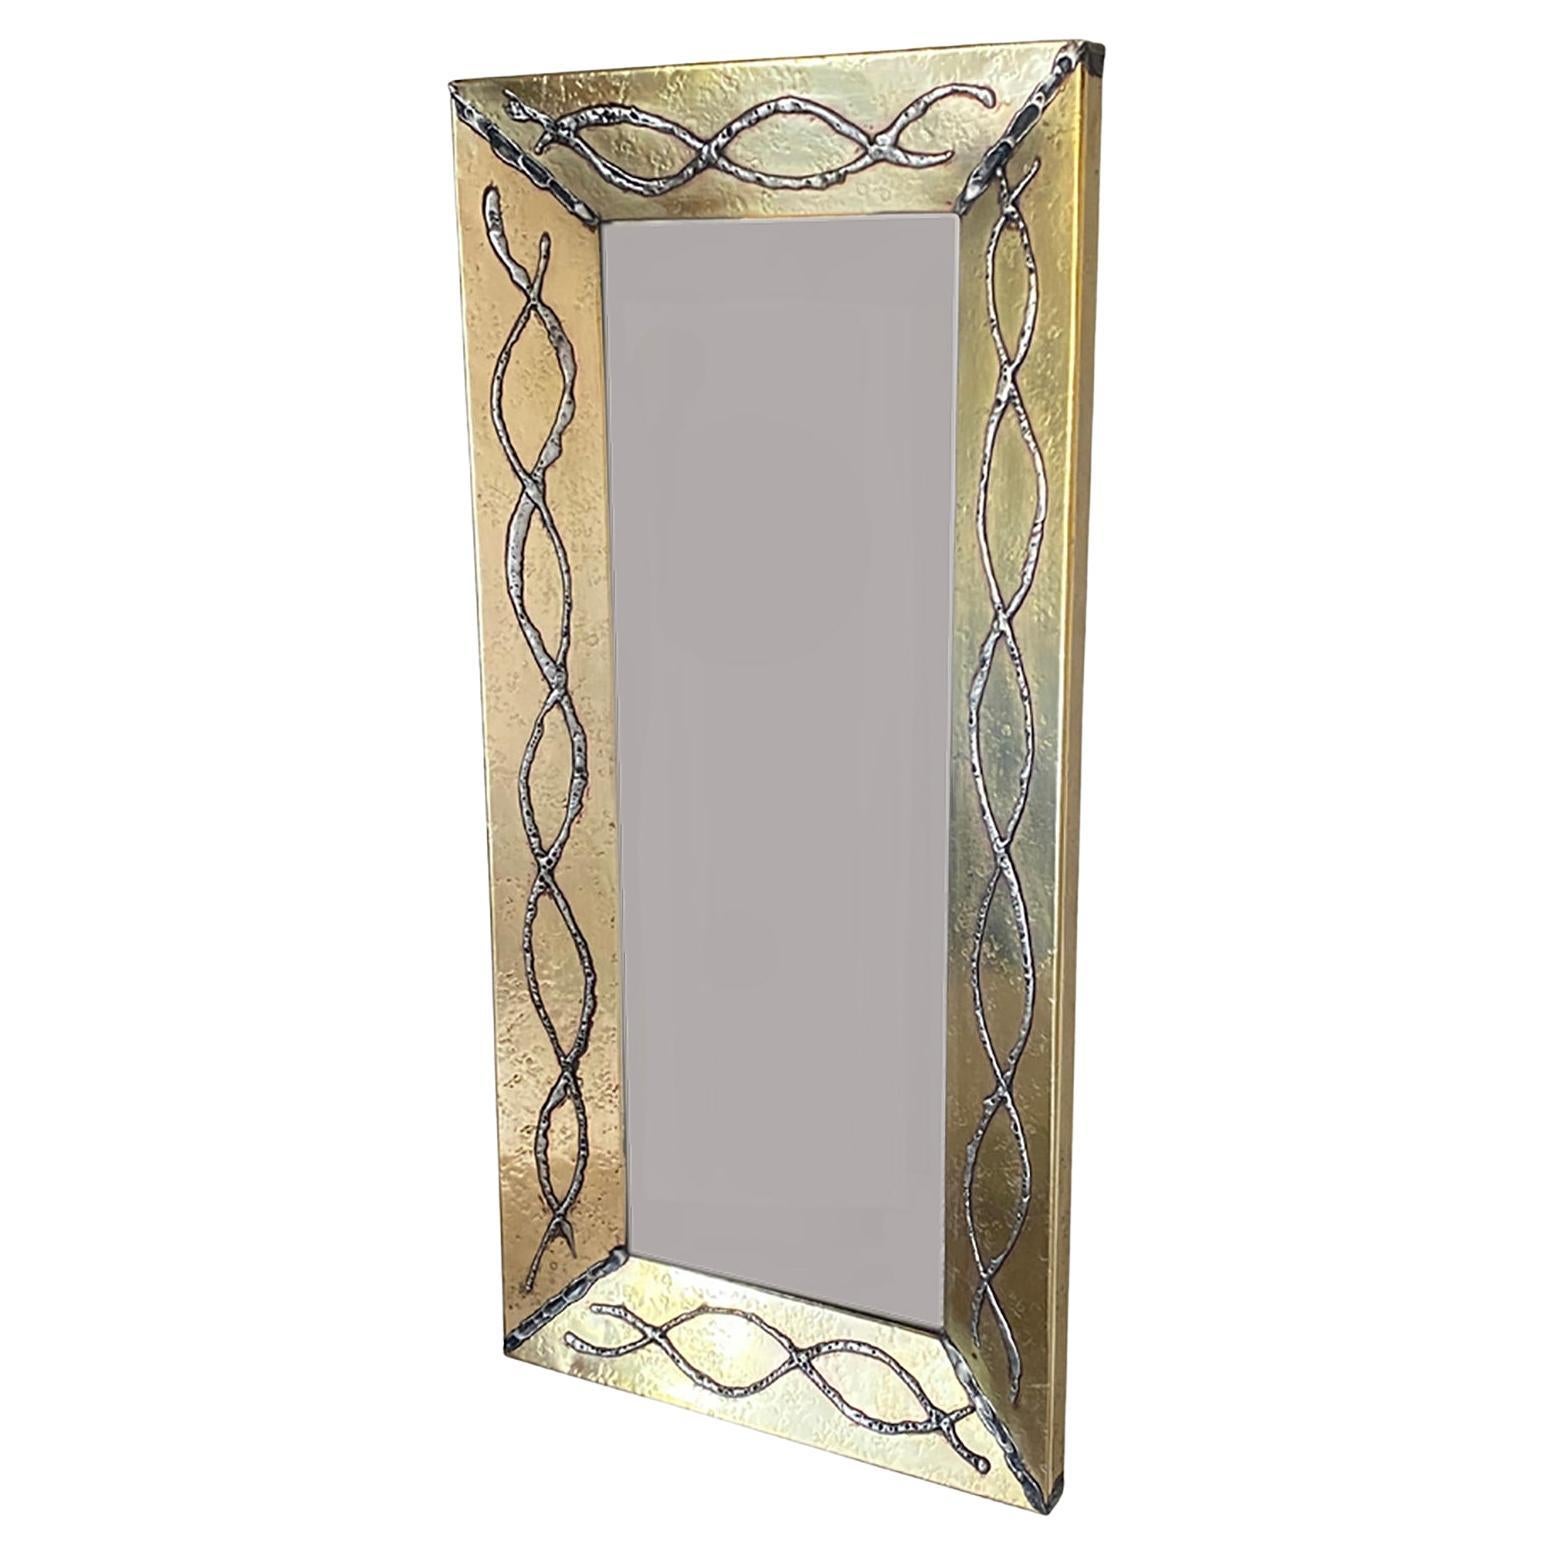 Midcentury brass mirror with vintage glass, with acid Patina.
This mirror will be placed in most interiors and is a perfect add-on for a midcentury design interior.
The creator mane is JC, and Got this Distinction :  Best 